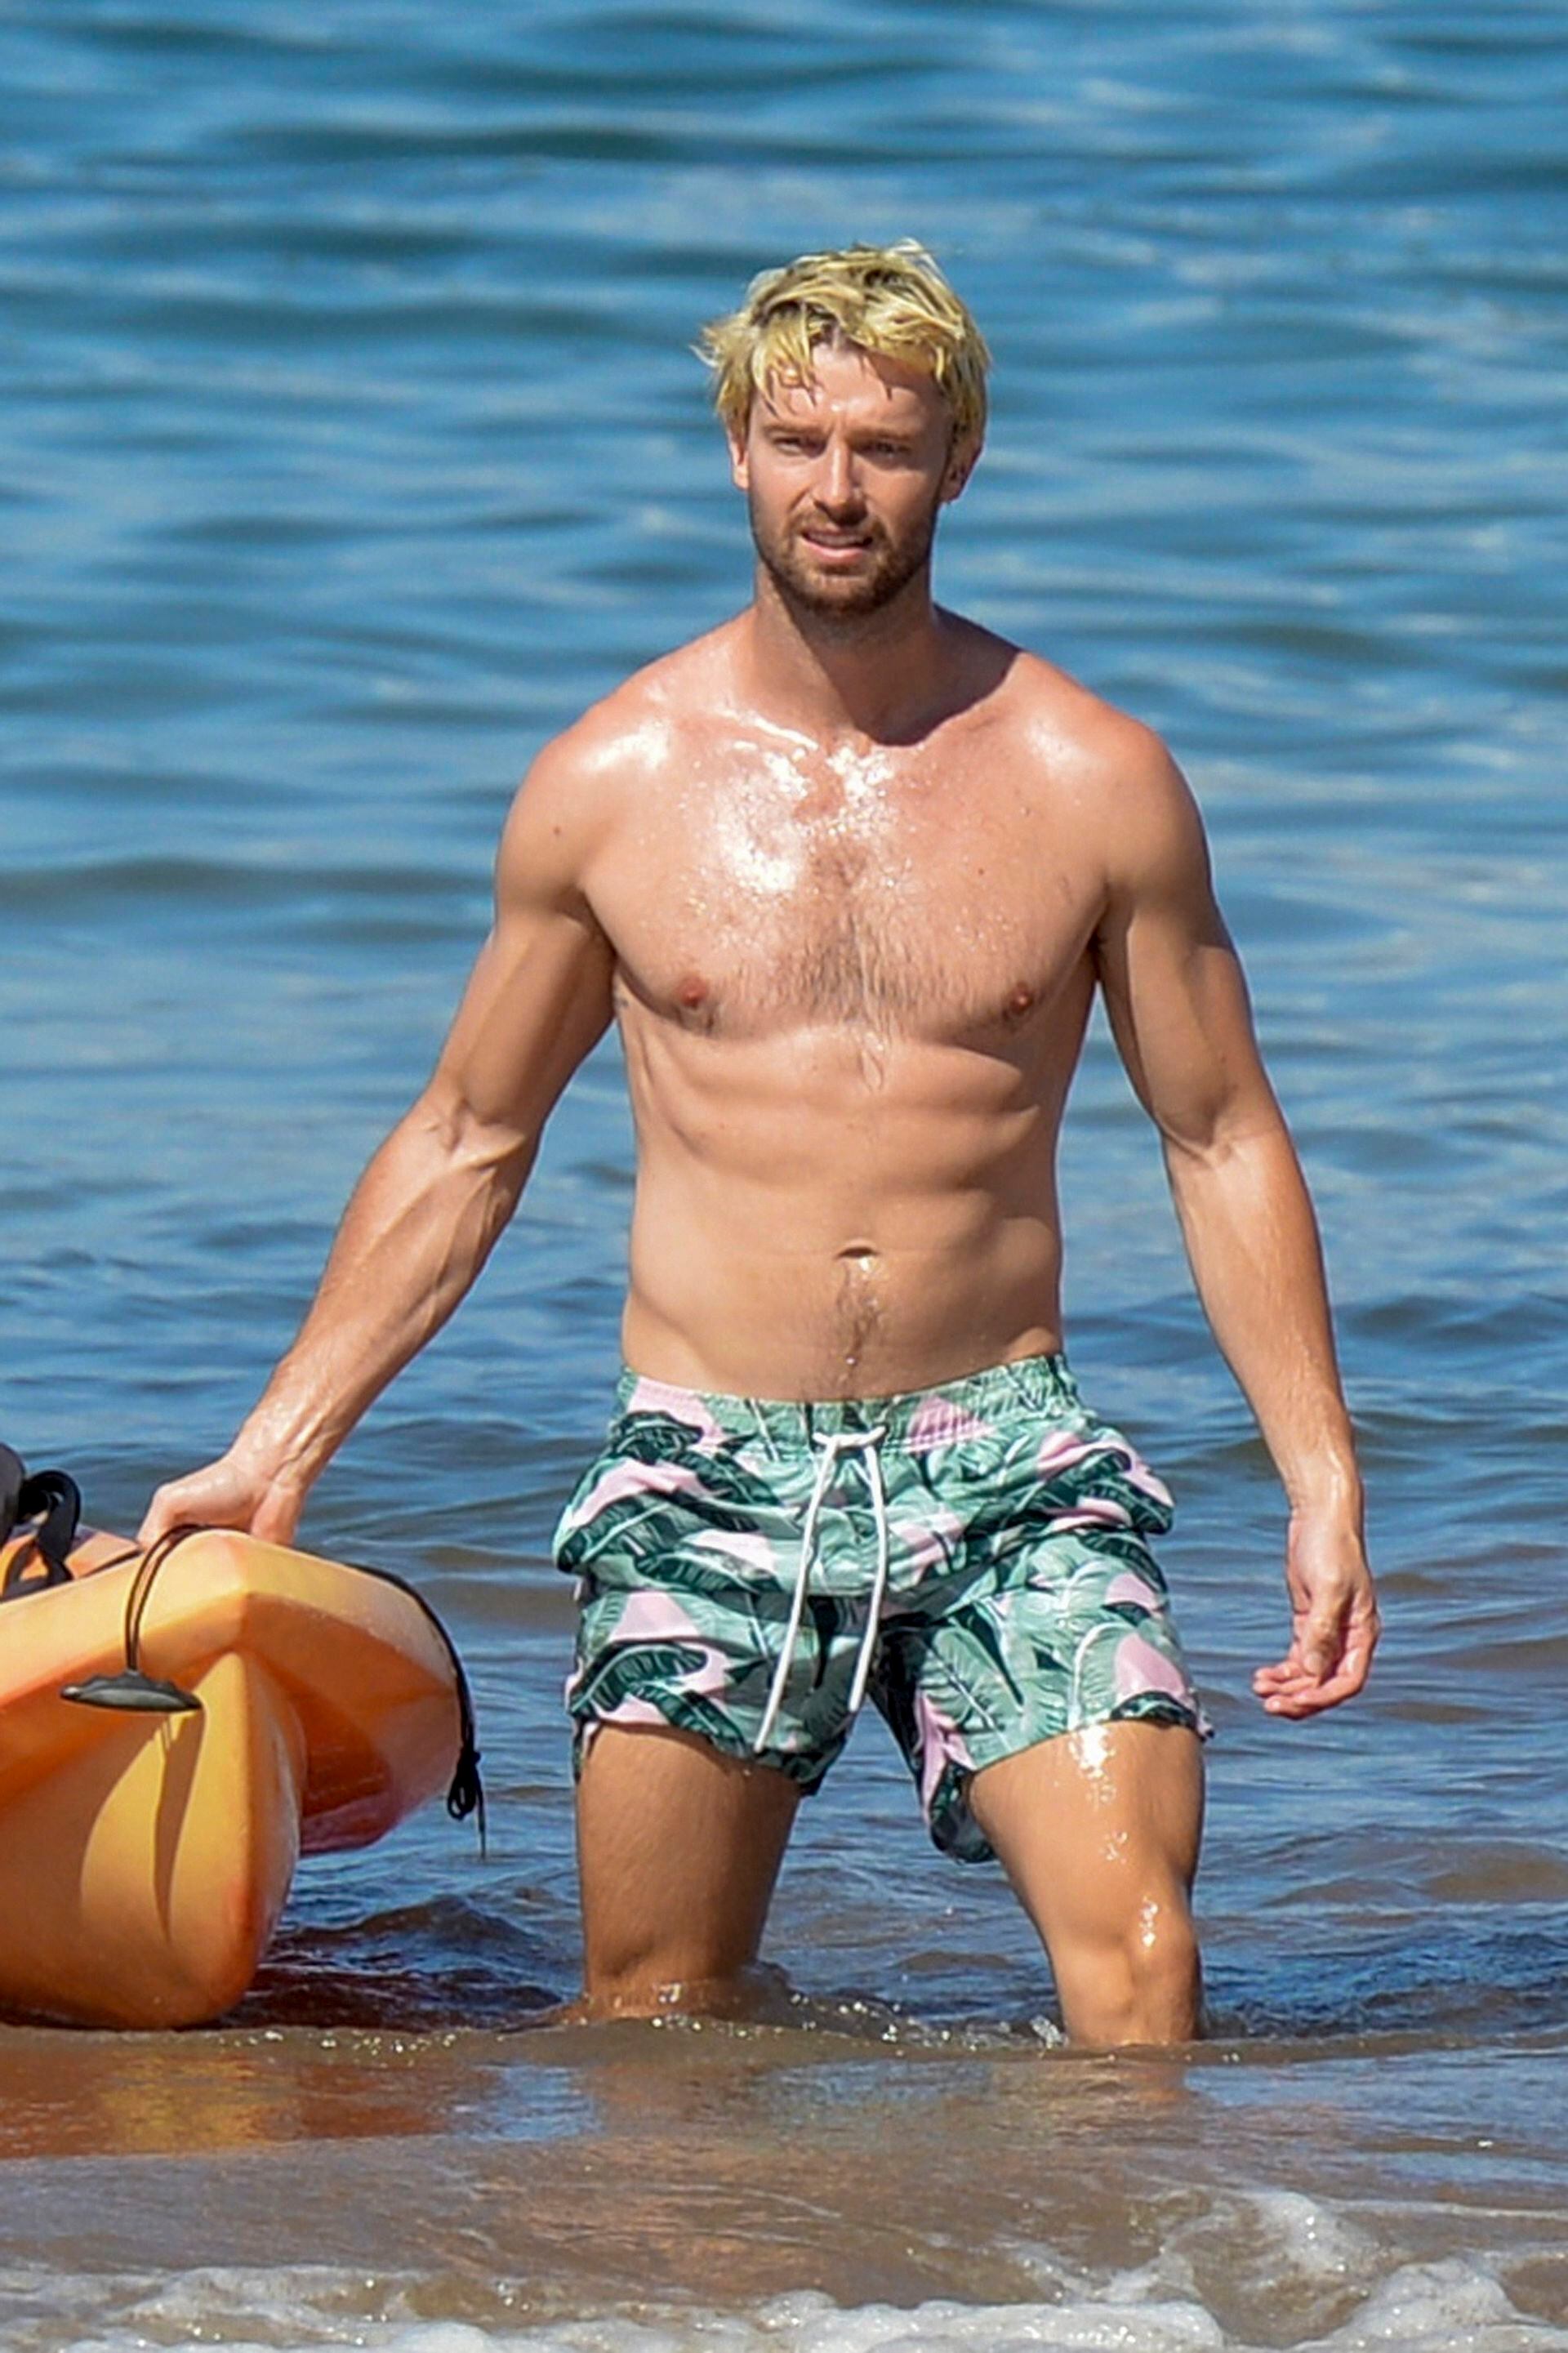 Patrick Schwarzenegger showed off his new blonde locks and muscles on the beaches of Maui  